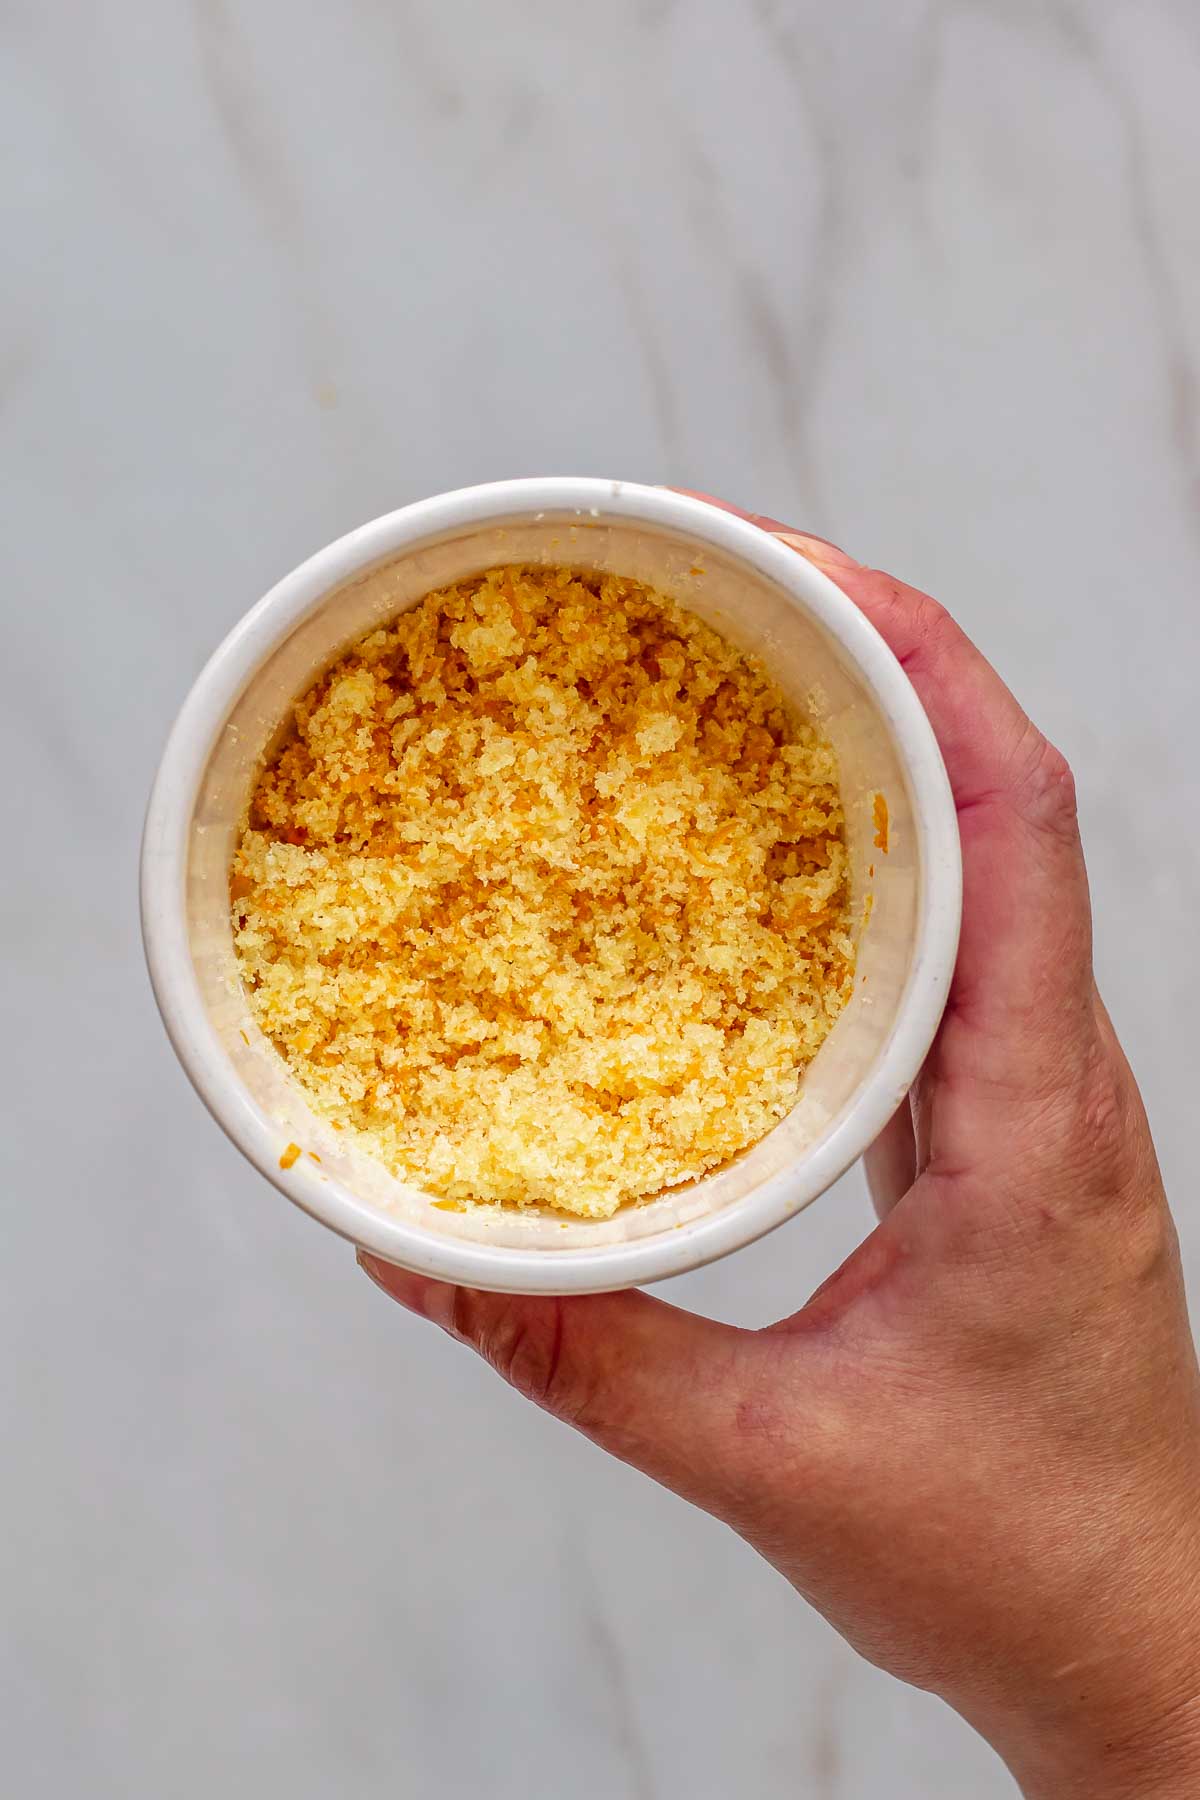 Orange zest and sugar mixed in a bowl.